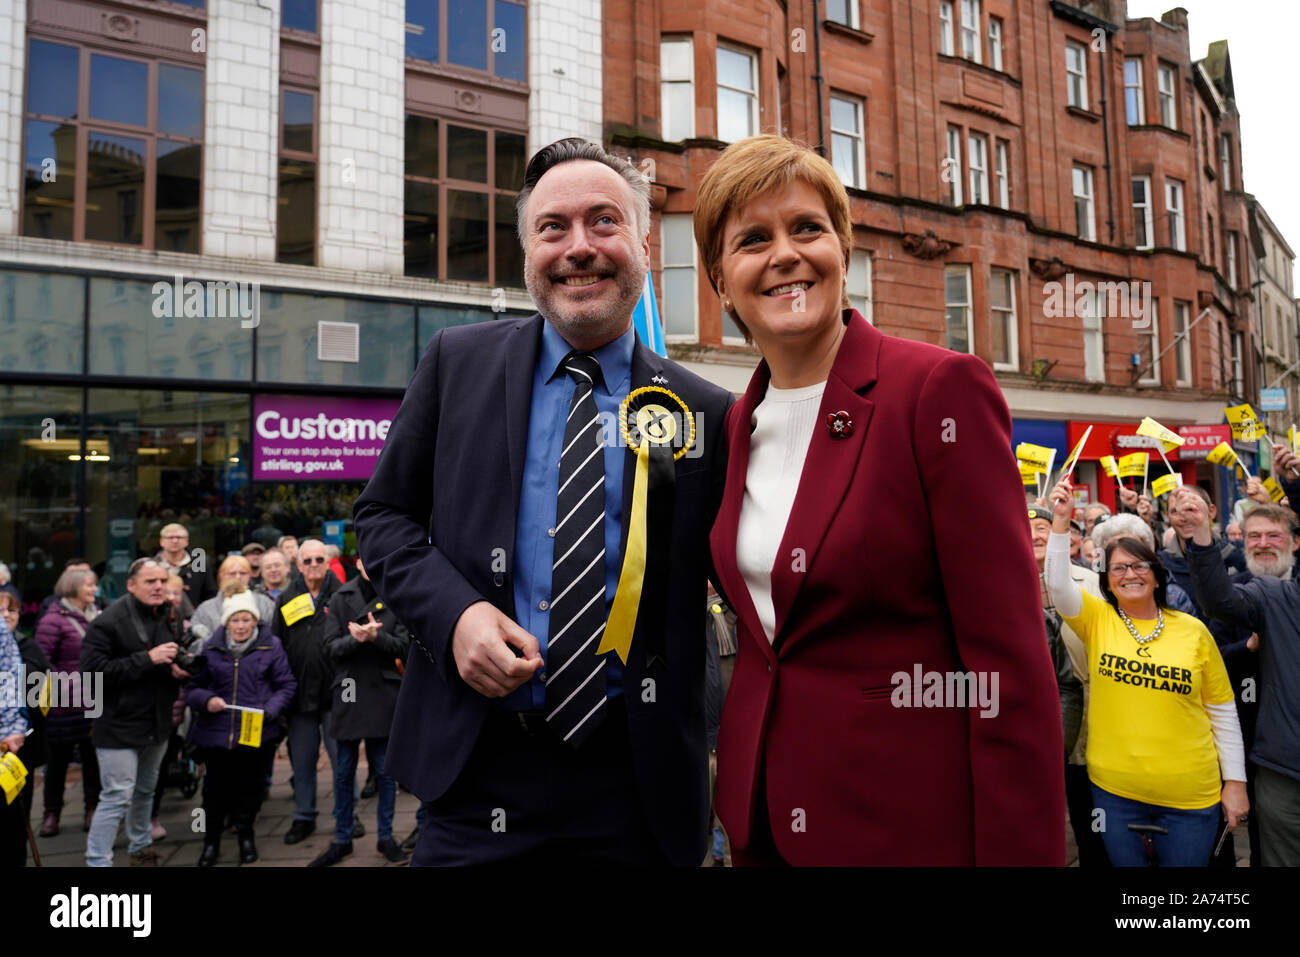 Stirling, Scotland, UK. 30th Oct, 2019. Scotland's First Minister Nicola Sturgeon joined SNP candidate for Stirling Alyn Smith for a campaign event at Made in Stirling Store and Creative Hub in Stirling. During a walkabout she addressed a group of SNP supporters and stated that A win for the SNP would be an unequivocal and irresistible demand for Scotland's right to choose it's own future. Credit: Iain Masterton/Alamy Live News Stock Photo